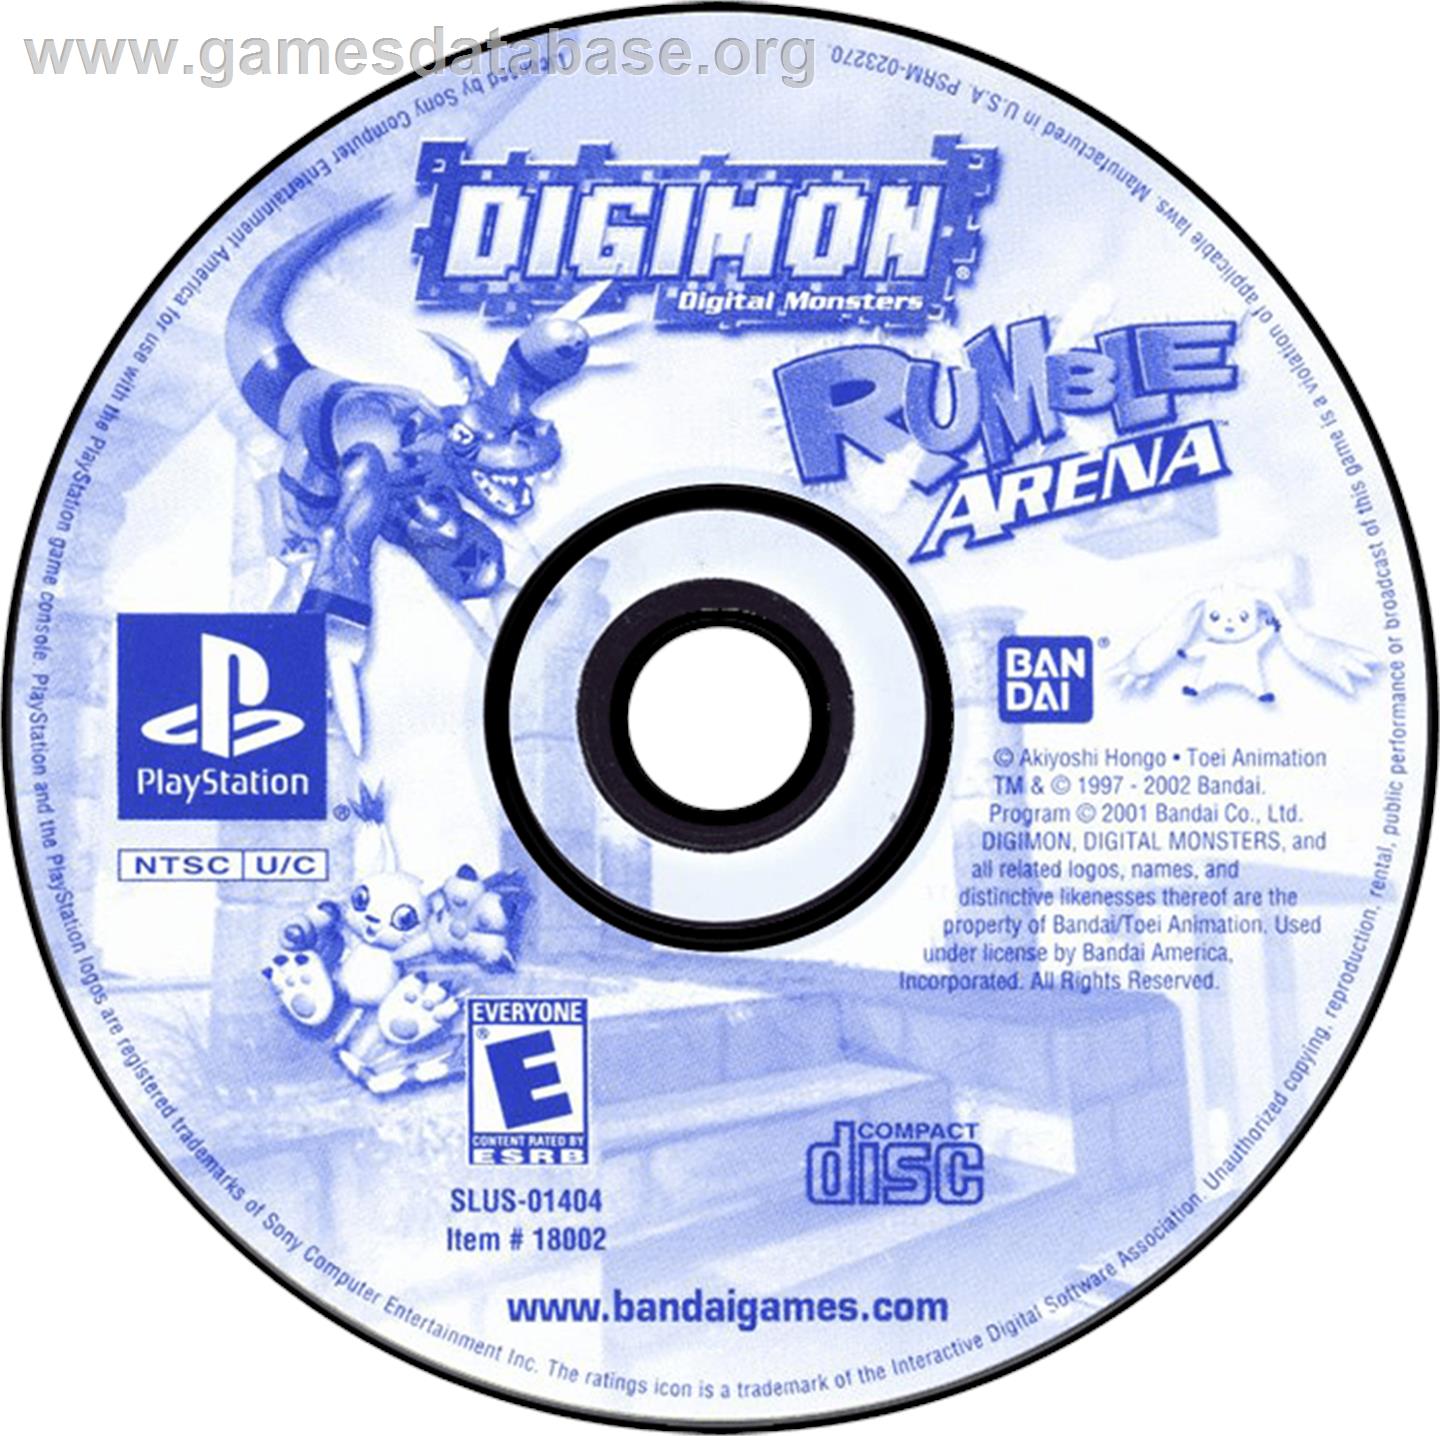 Digimon Rumble Arena - Sony Playstation - Artwork - Disc